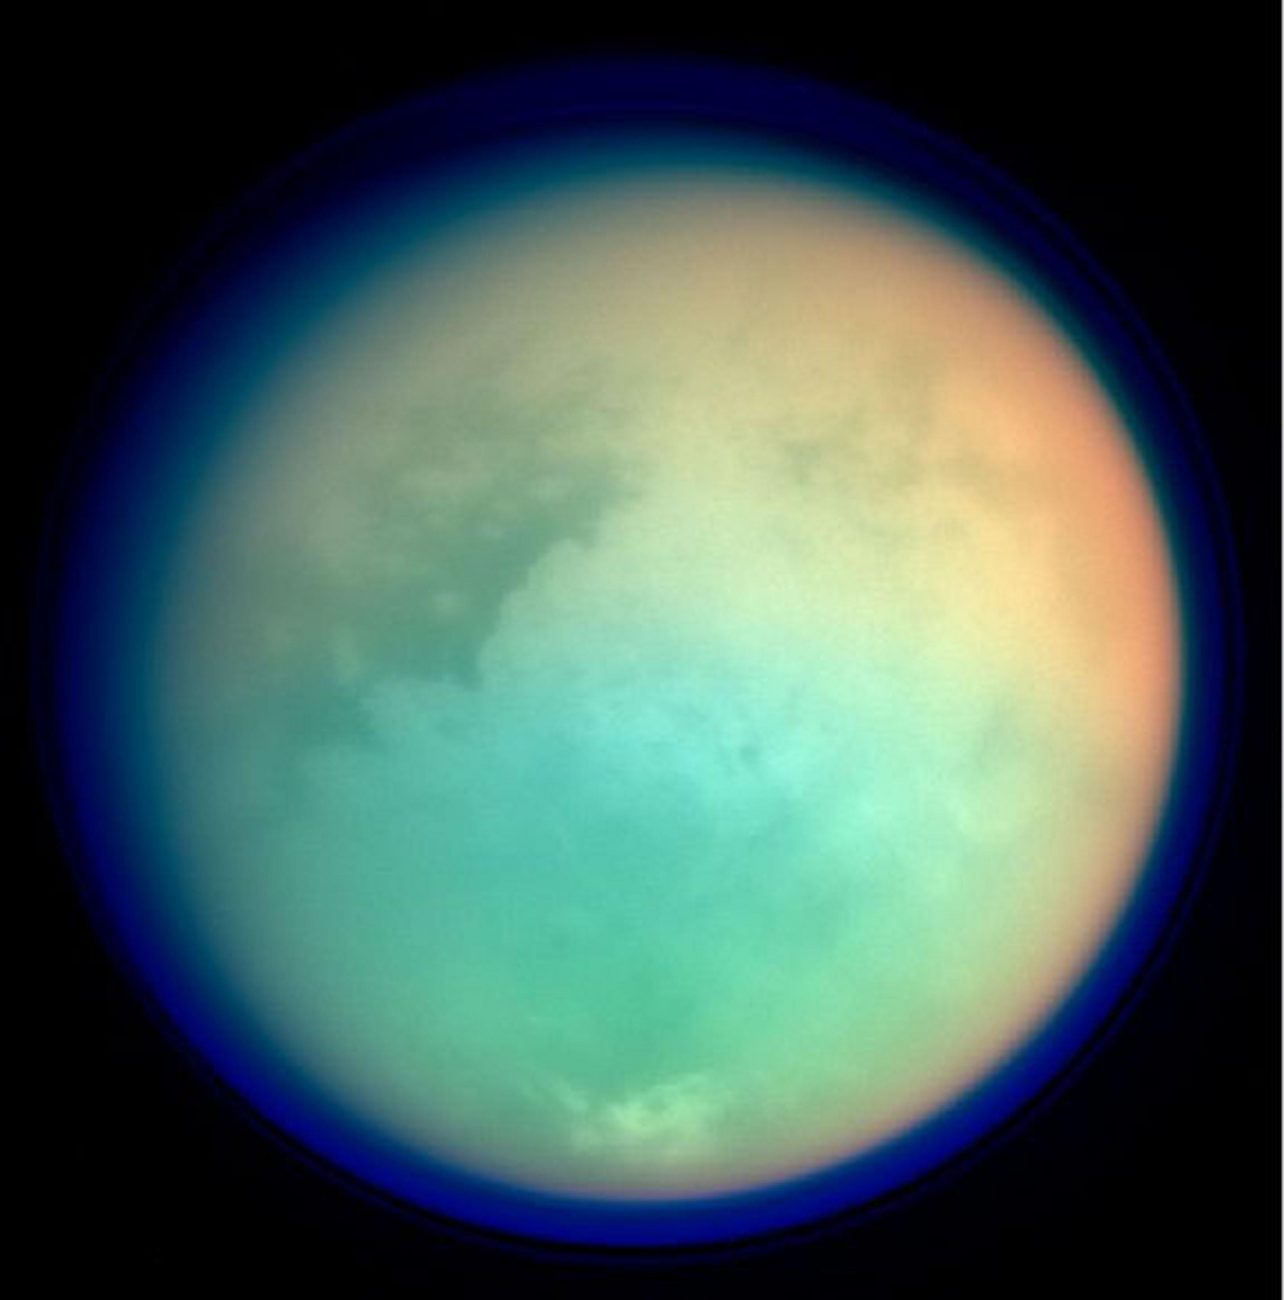 This undated NASA handout shows Saturn's moon, Titan, in ultraviolet and infrared wavelengths. The Cassini spacecraft took the image while on its mission to. gather information on Saturn, its rings, atmosphere and moons. The different colors represent various atmospheric content on Titan. Image Credit: NASA.